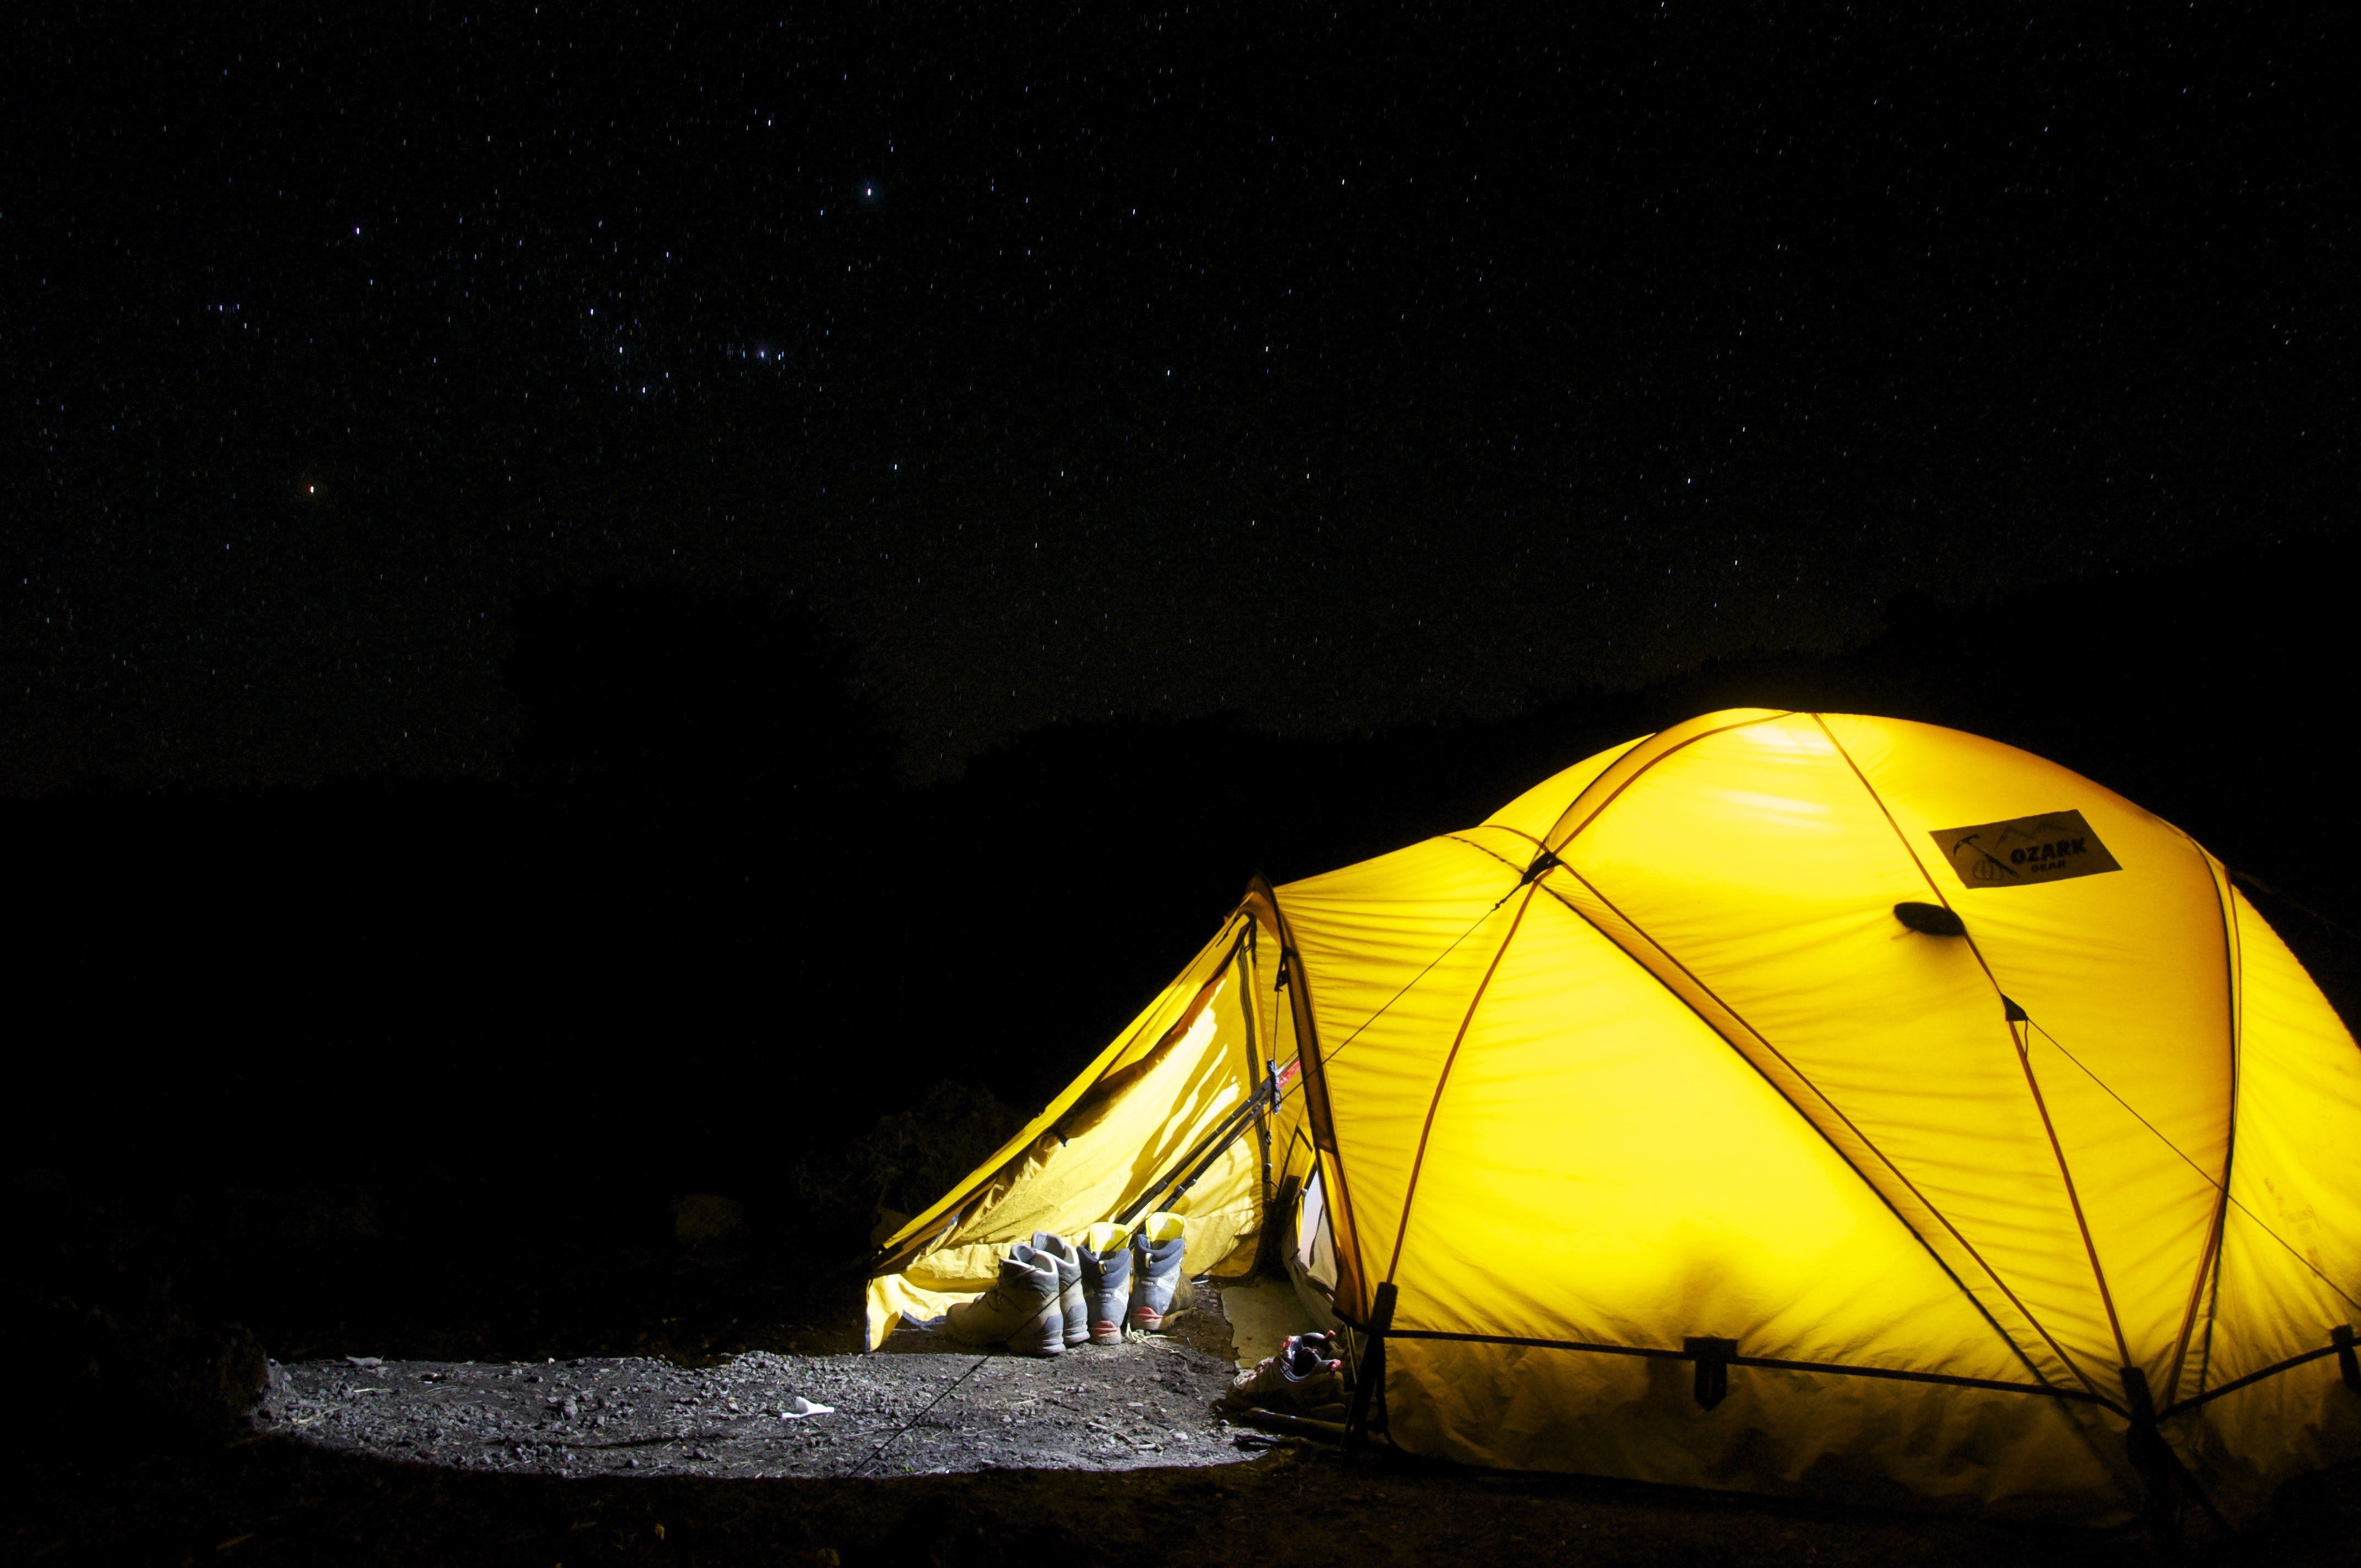 Camping in the woods. | Source: Pexels